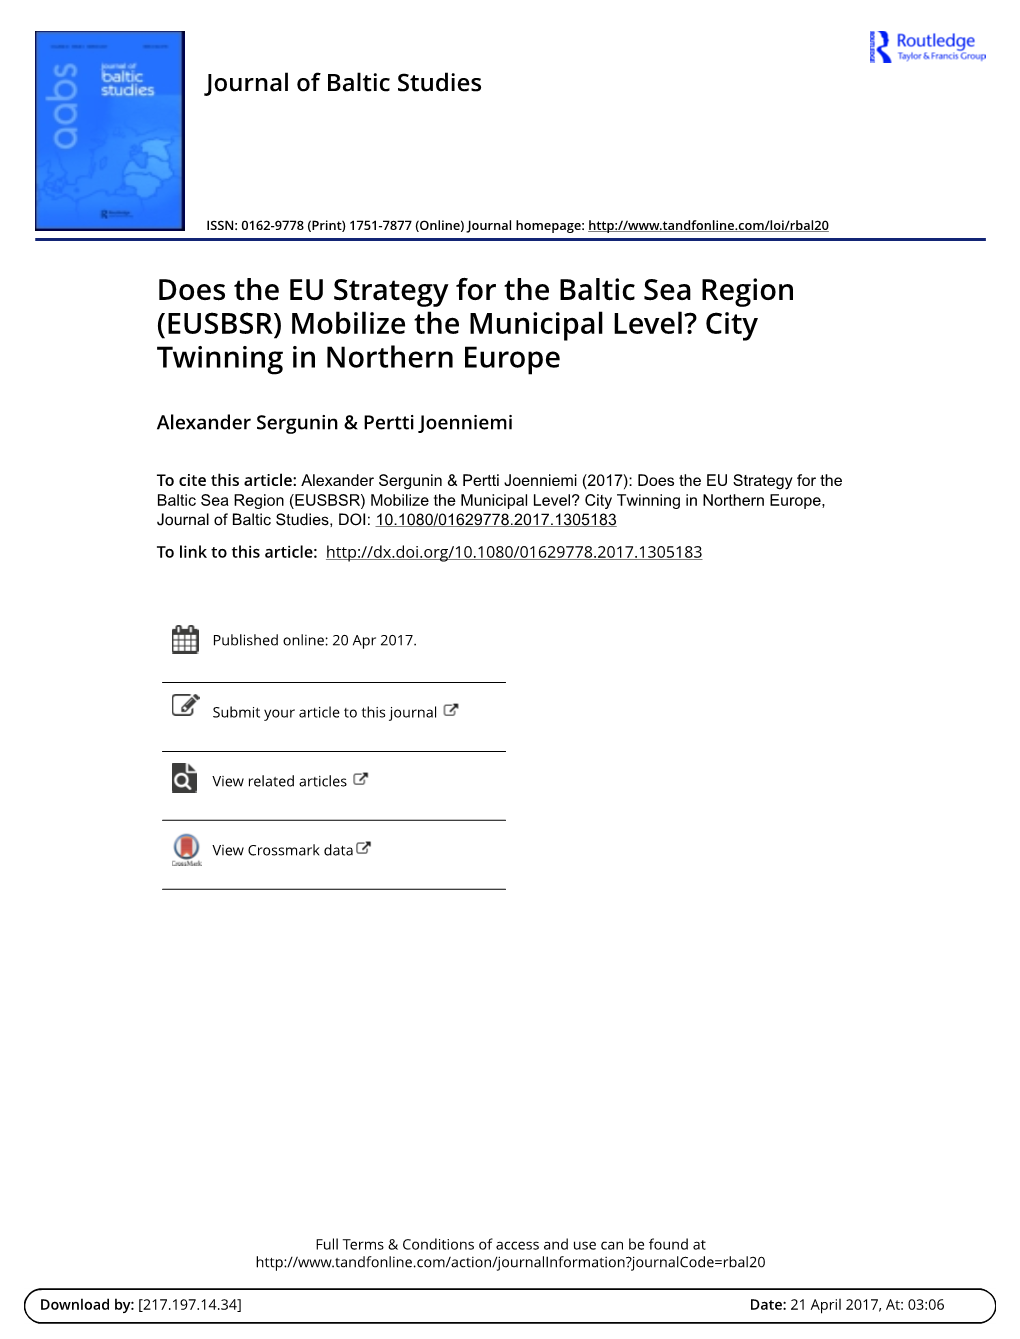 Does the EU Strategy for the Baltic Sea Region (EUSBSR) Mobilize the Municipal Level? City Twinning in Northern Europe